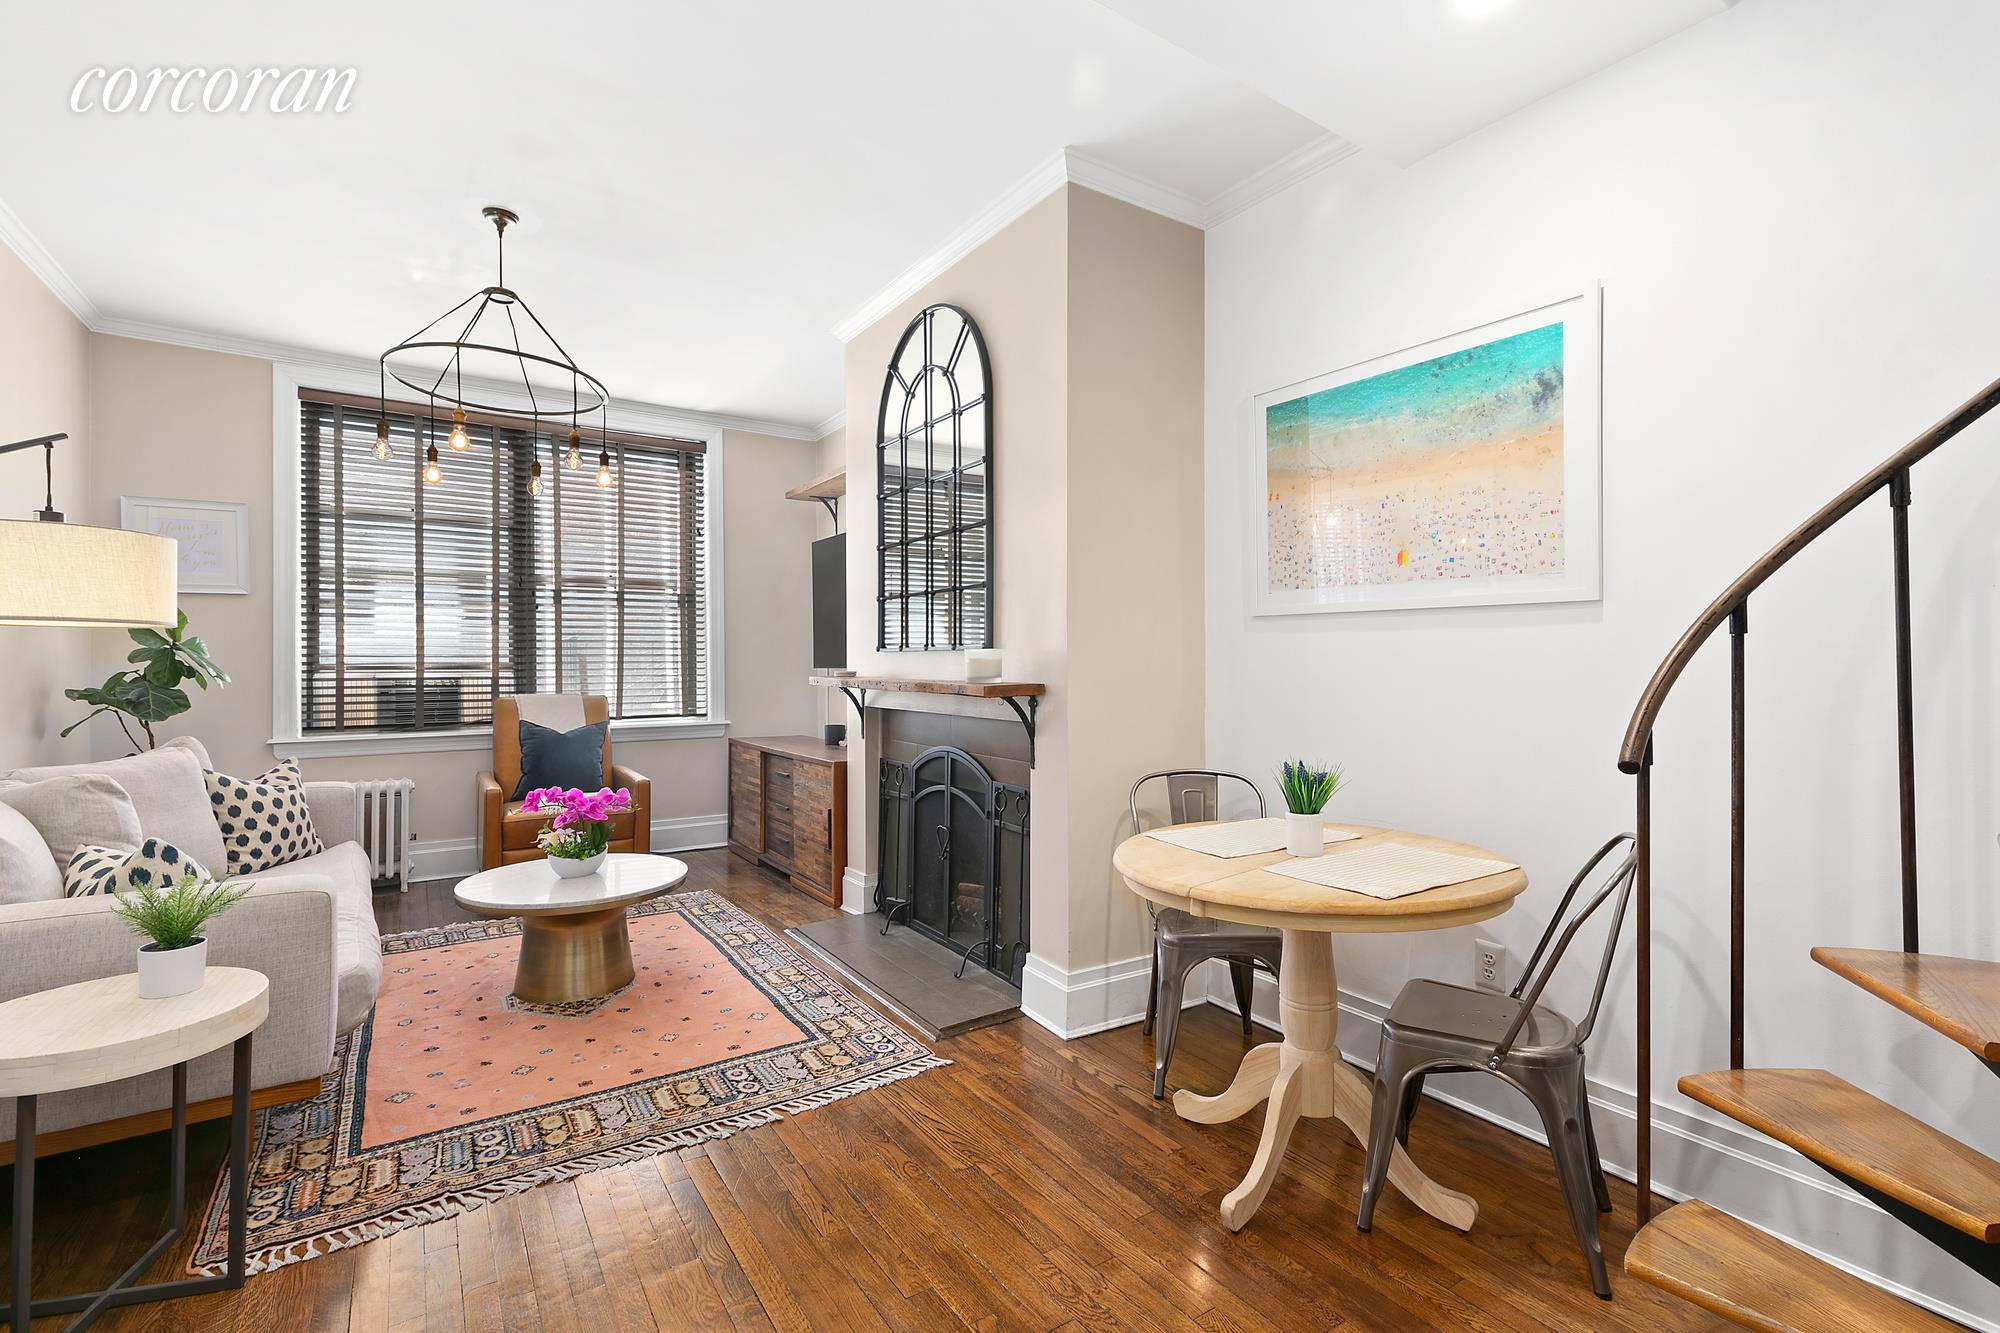 New to market ! Situated atop this four story cond op in vibrant South Slope, is this duplex apartment with one bedroom, 1 1 2 baths, a wood burning fireplace ...